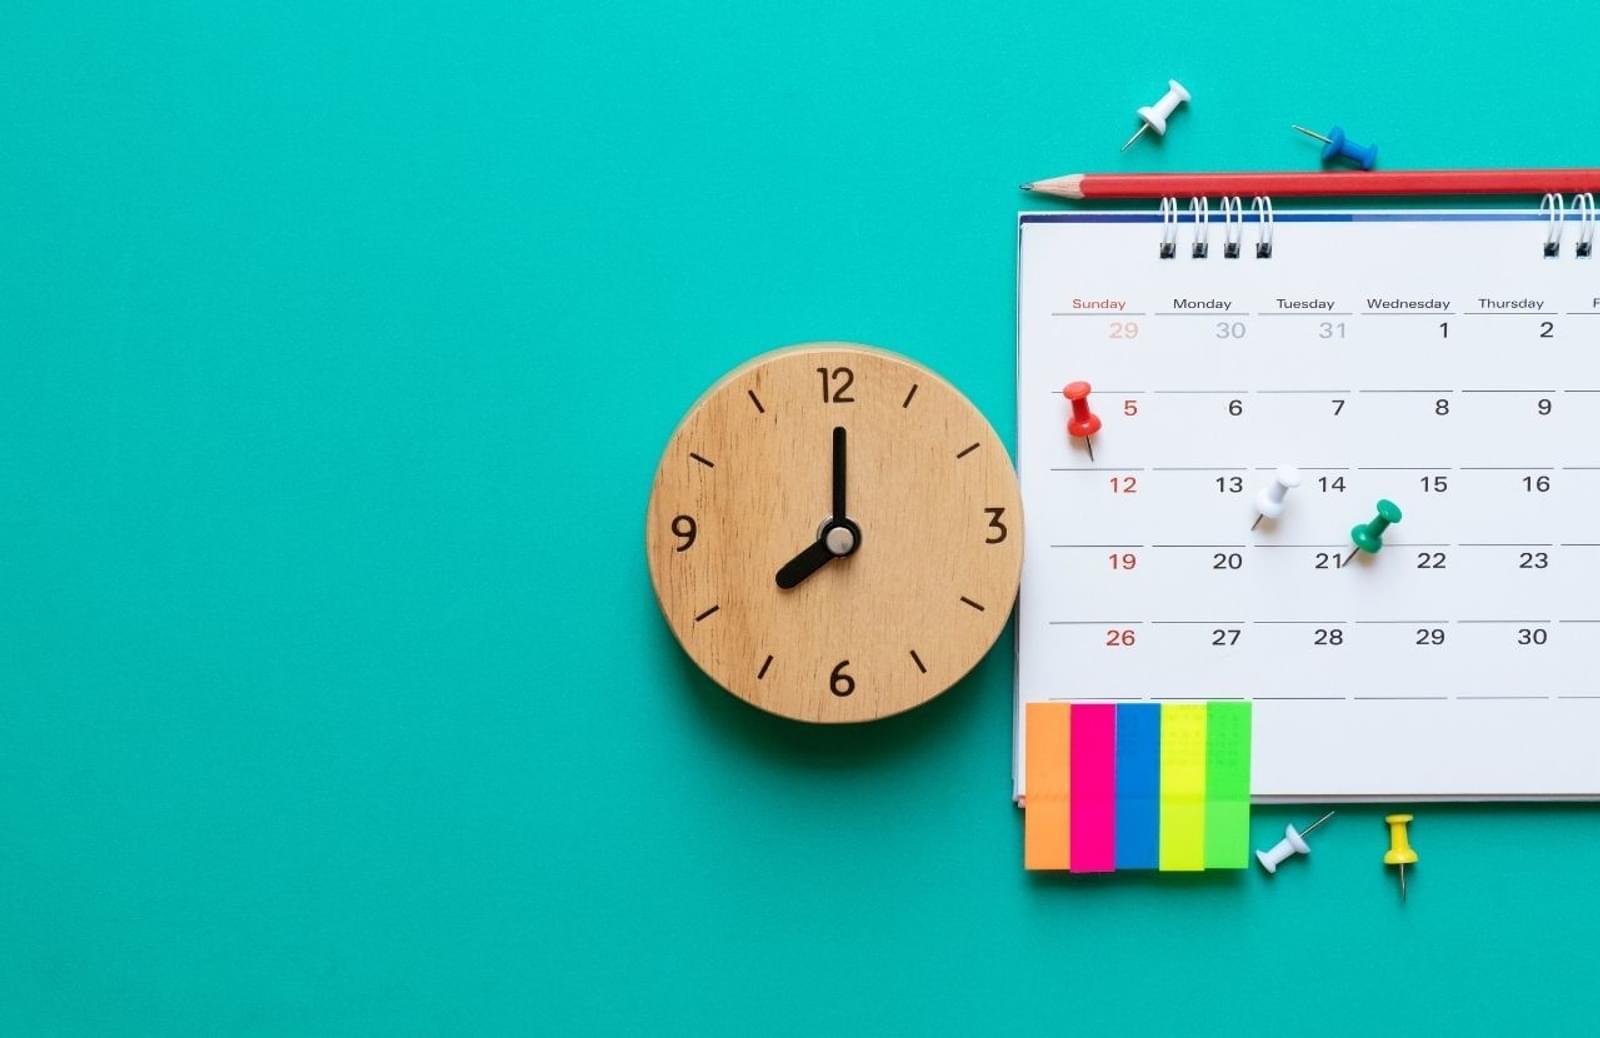 Clock, calendar, and post-it notes on a blue background